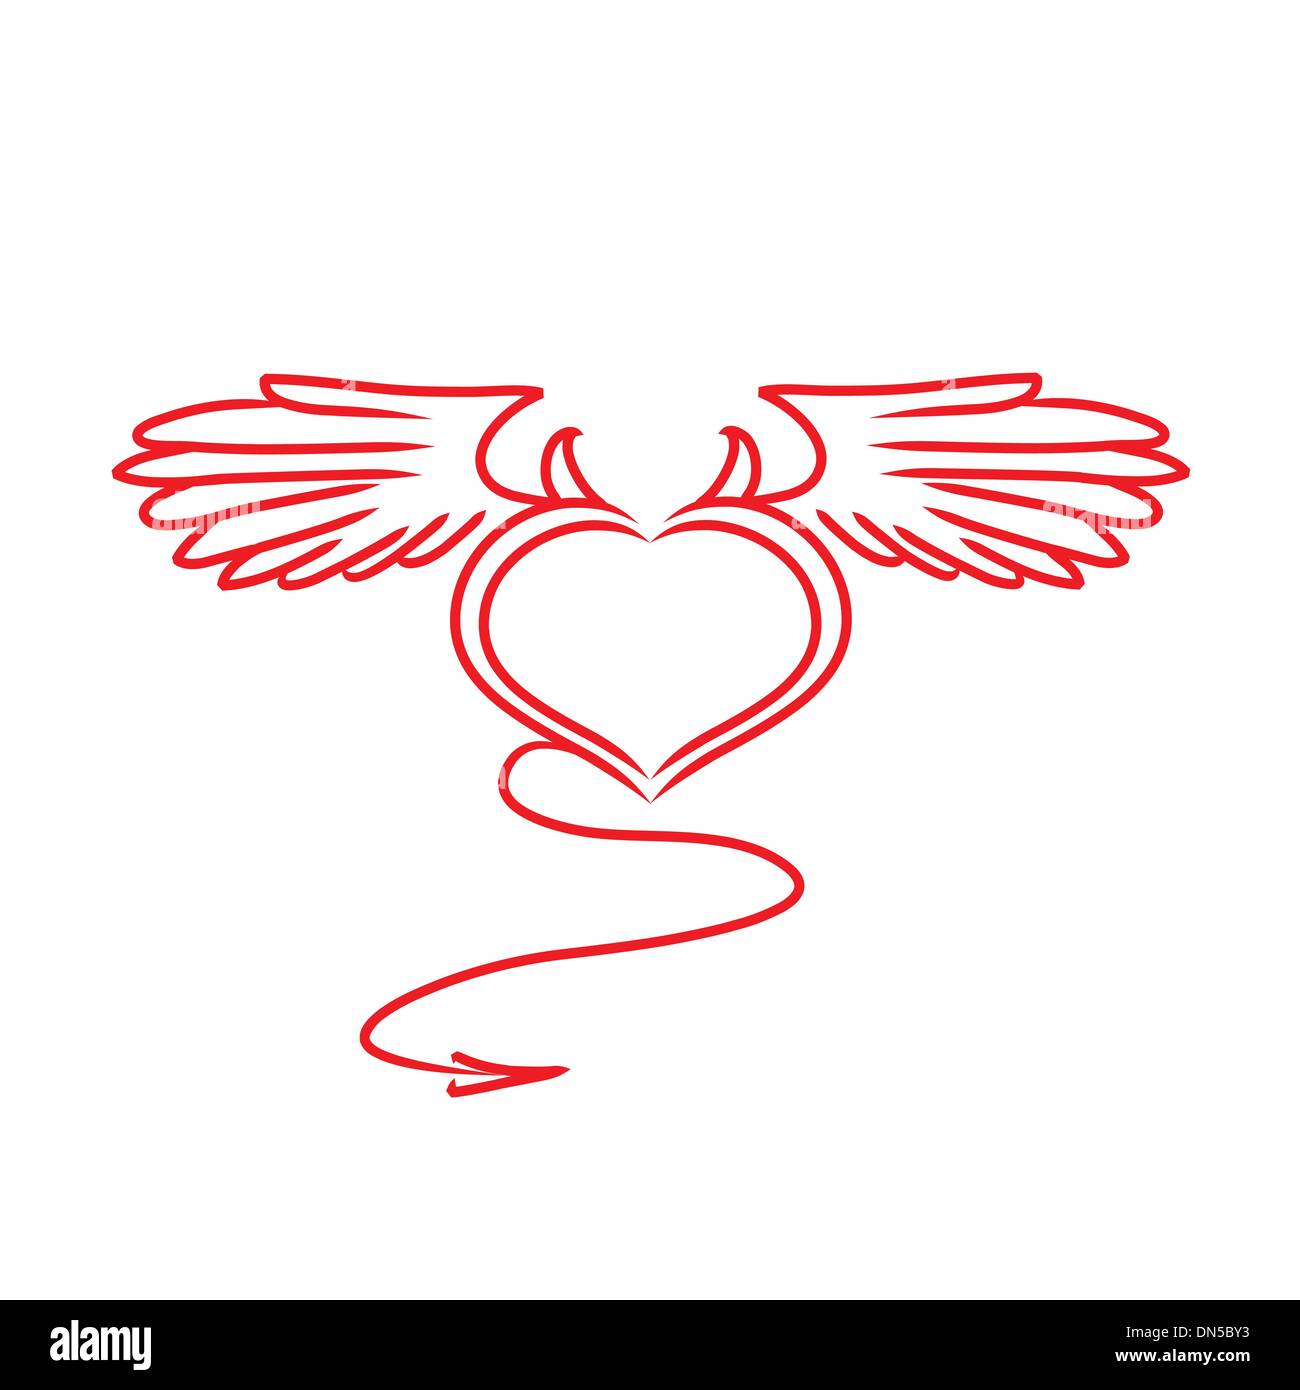 red and white heart with a tail, wings and horns tattoo Stock Vector